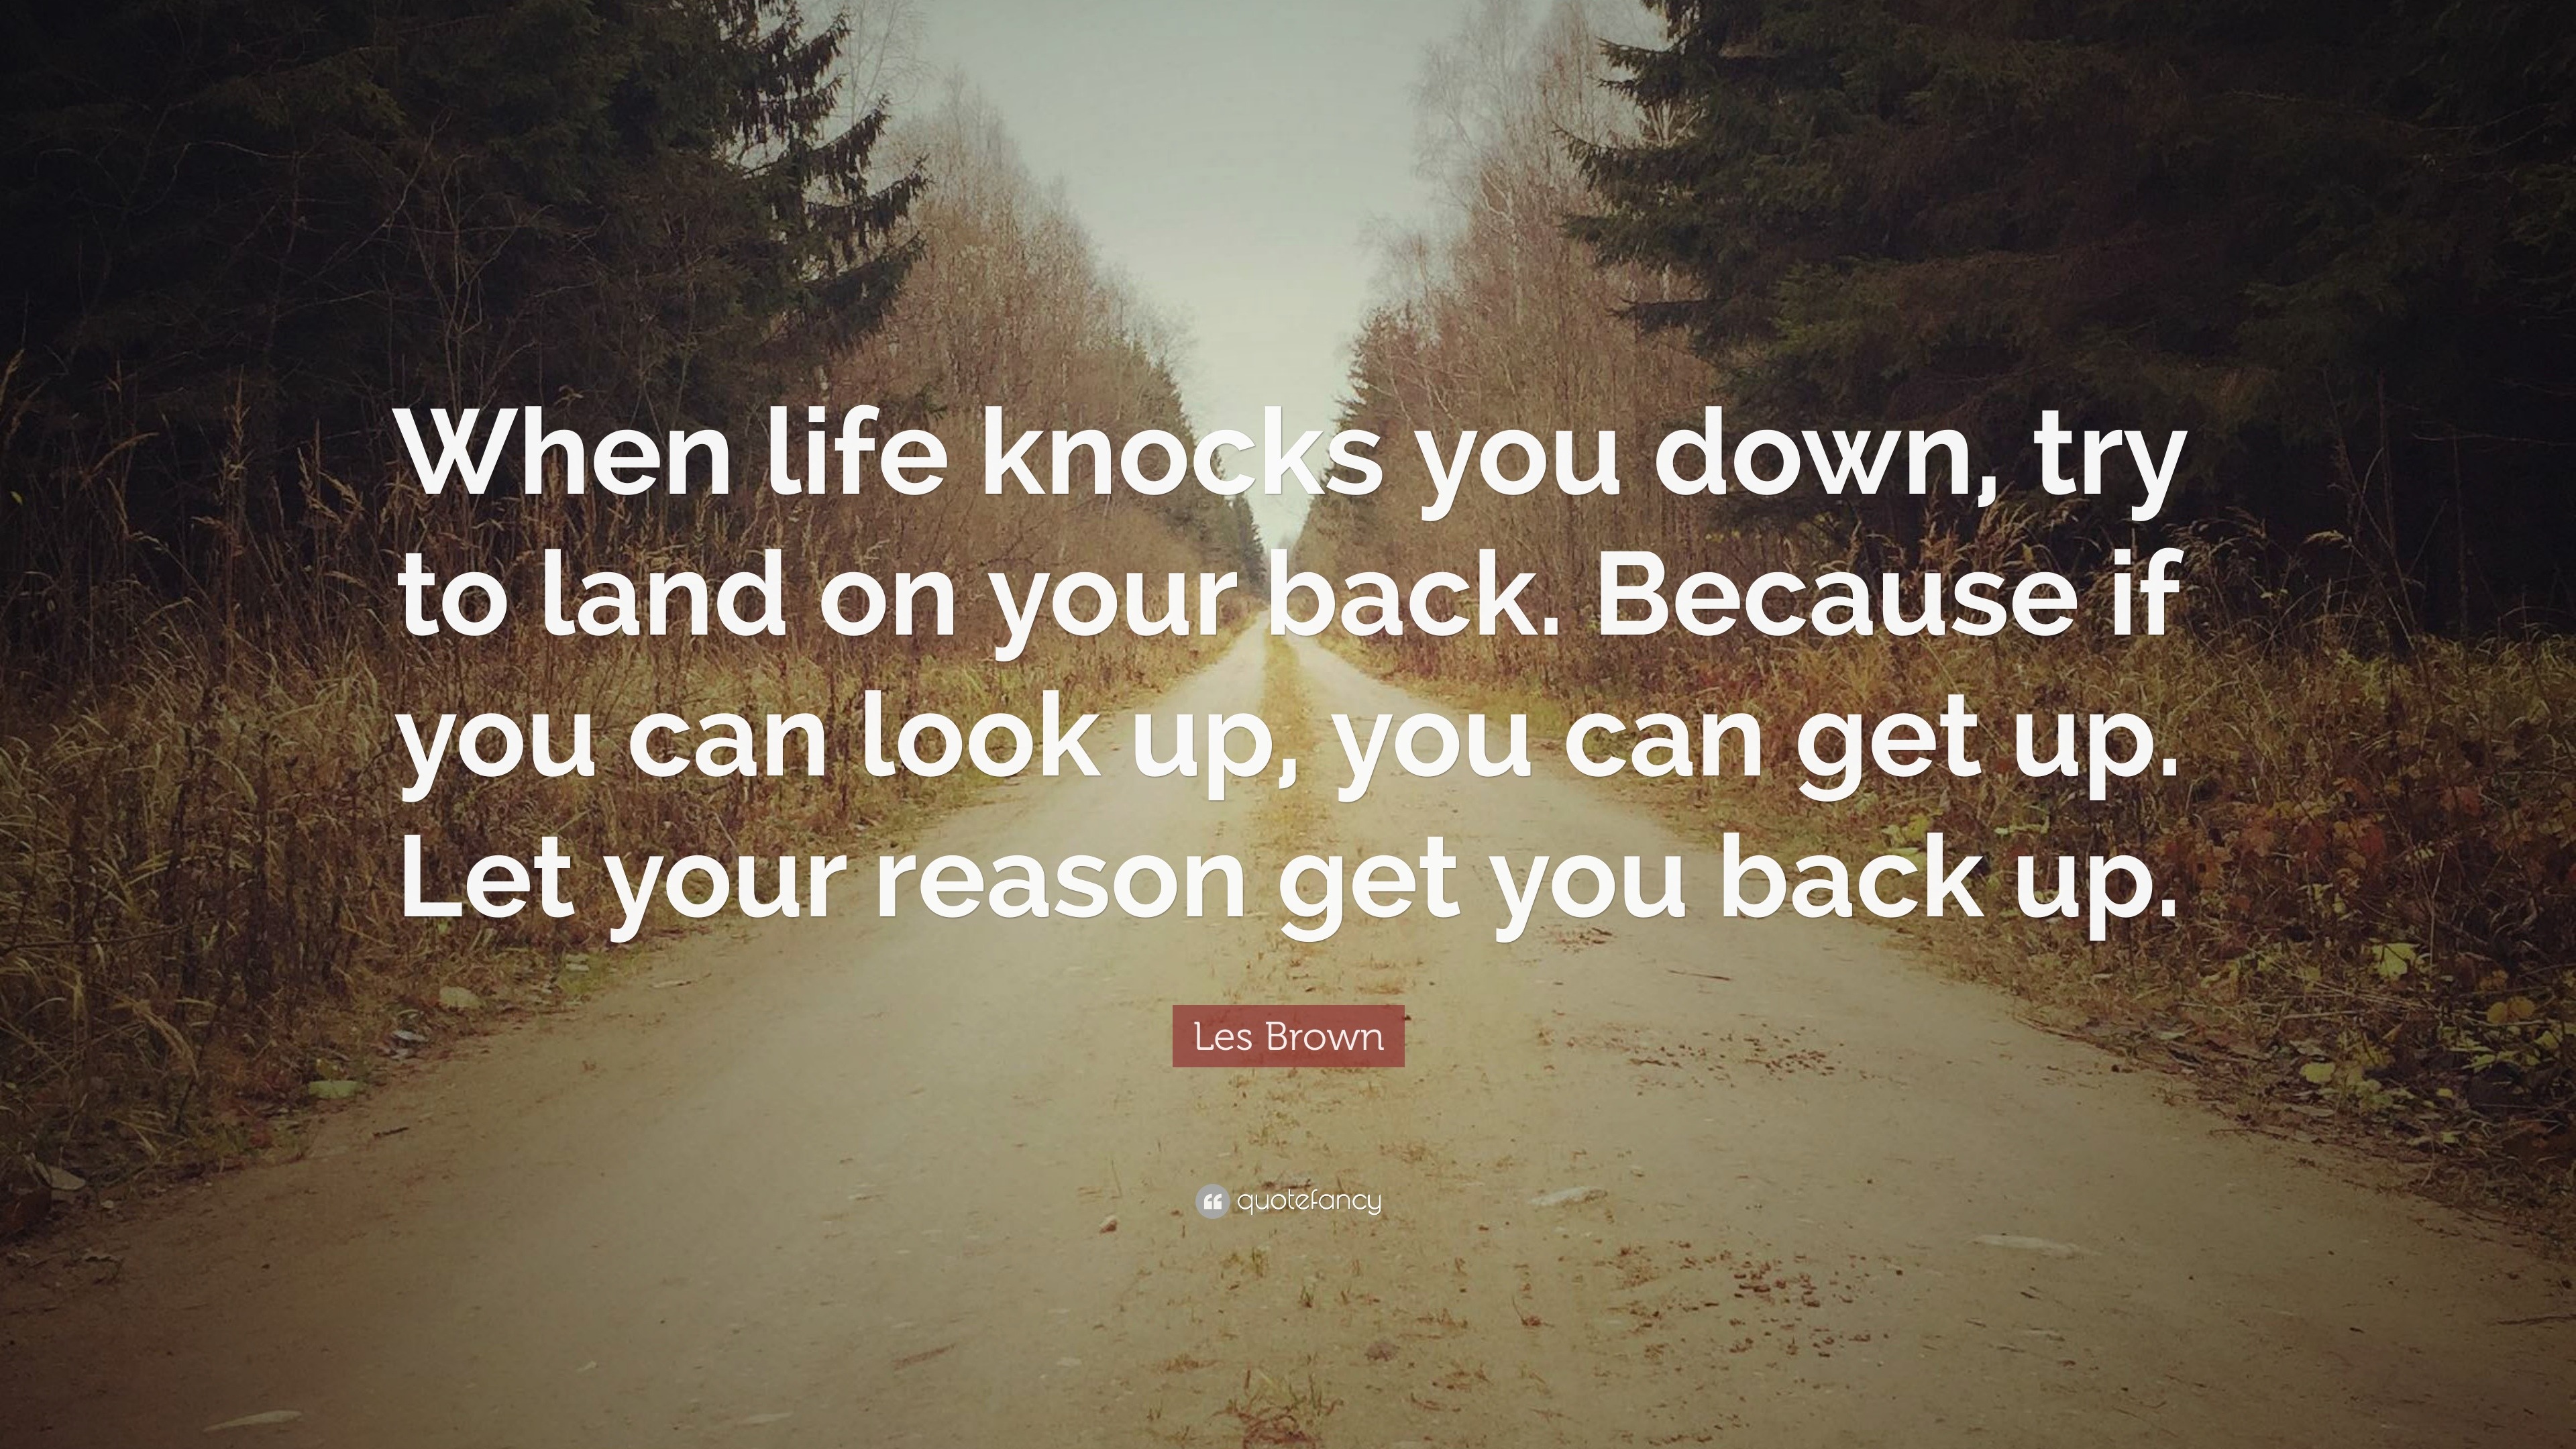 Les Brown Quote “When life knocks you down try to land on your